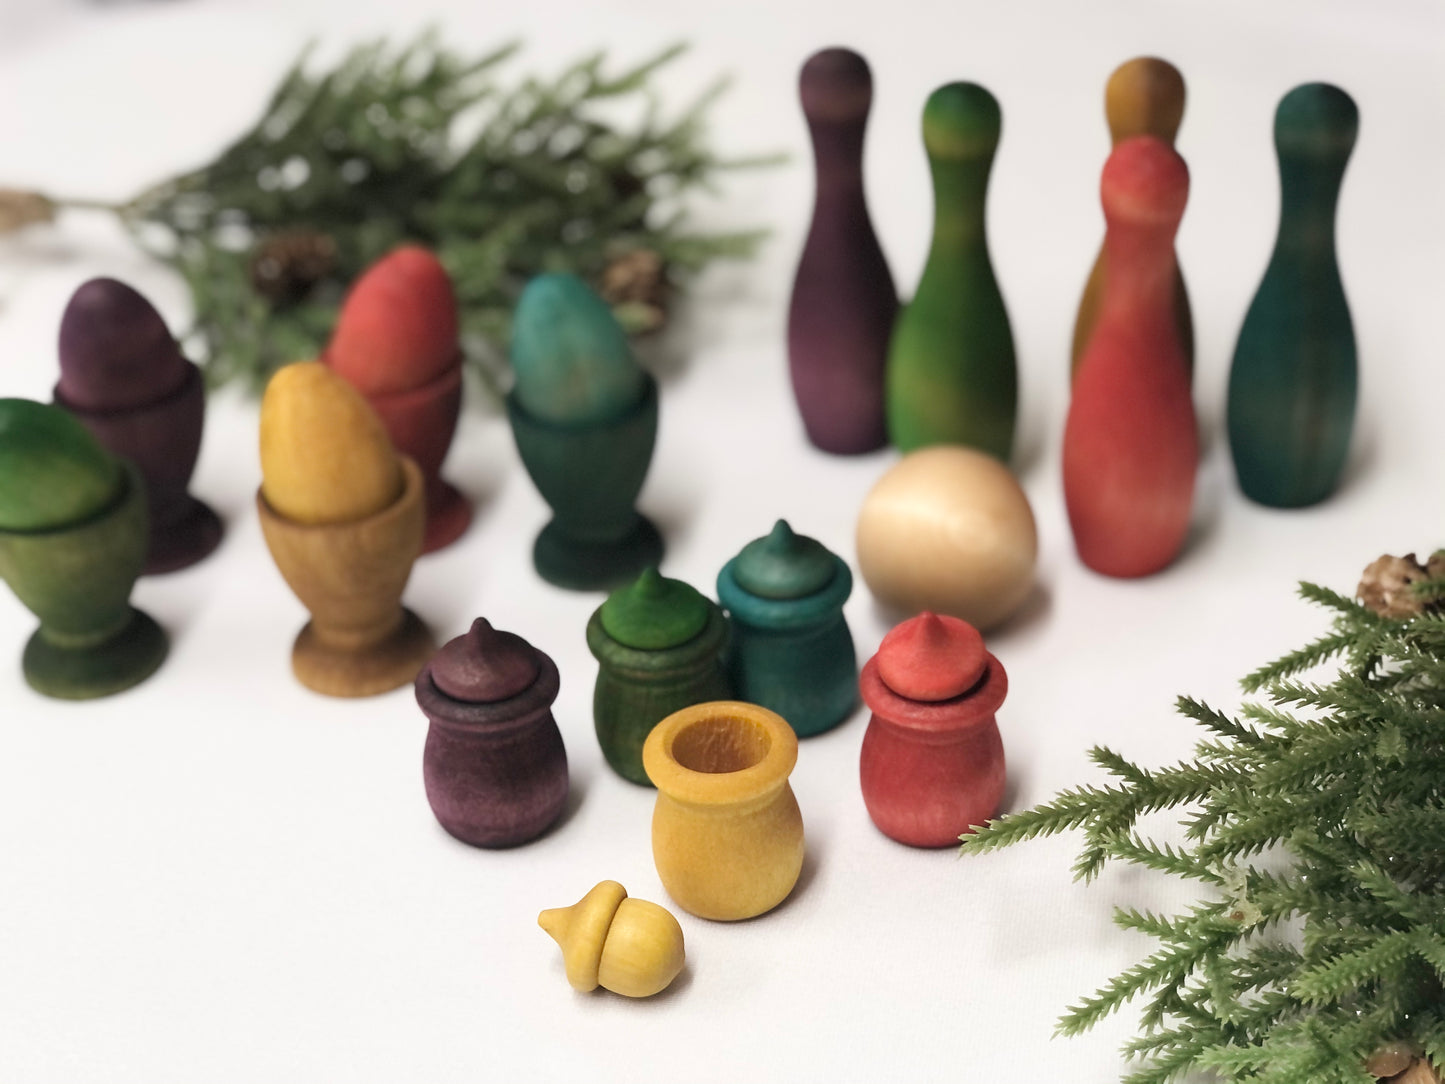 Naturally Dyed Rainbow Wooden Bowling Pins